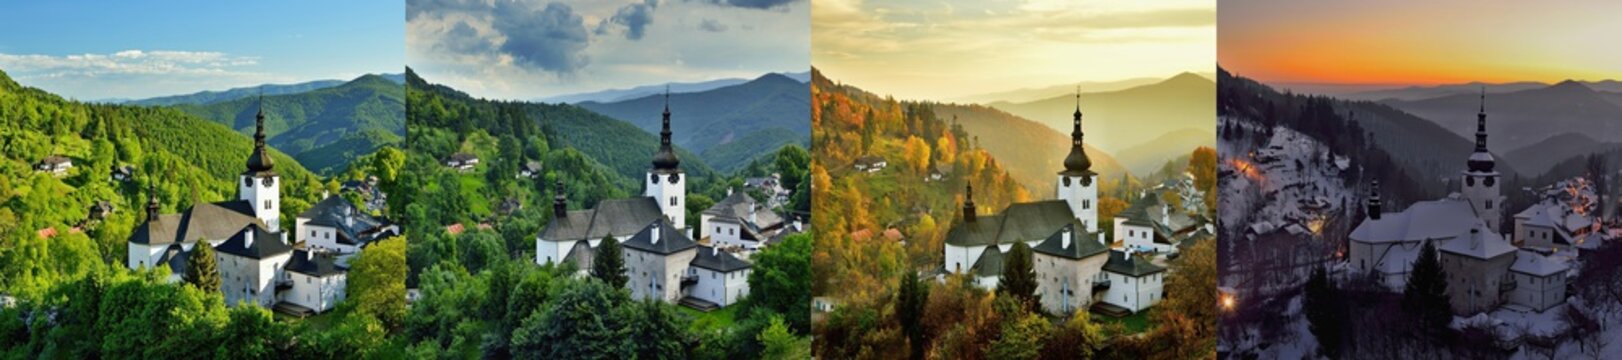 Four season folder in old mining village in Slovakia. Historic church in Spania Dolina. Spring, summer, autumn and winter landscape.